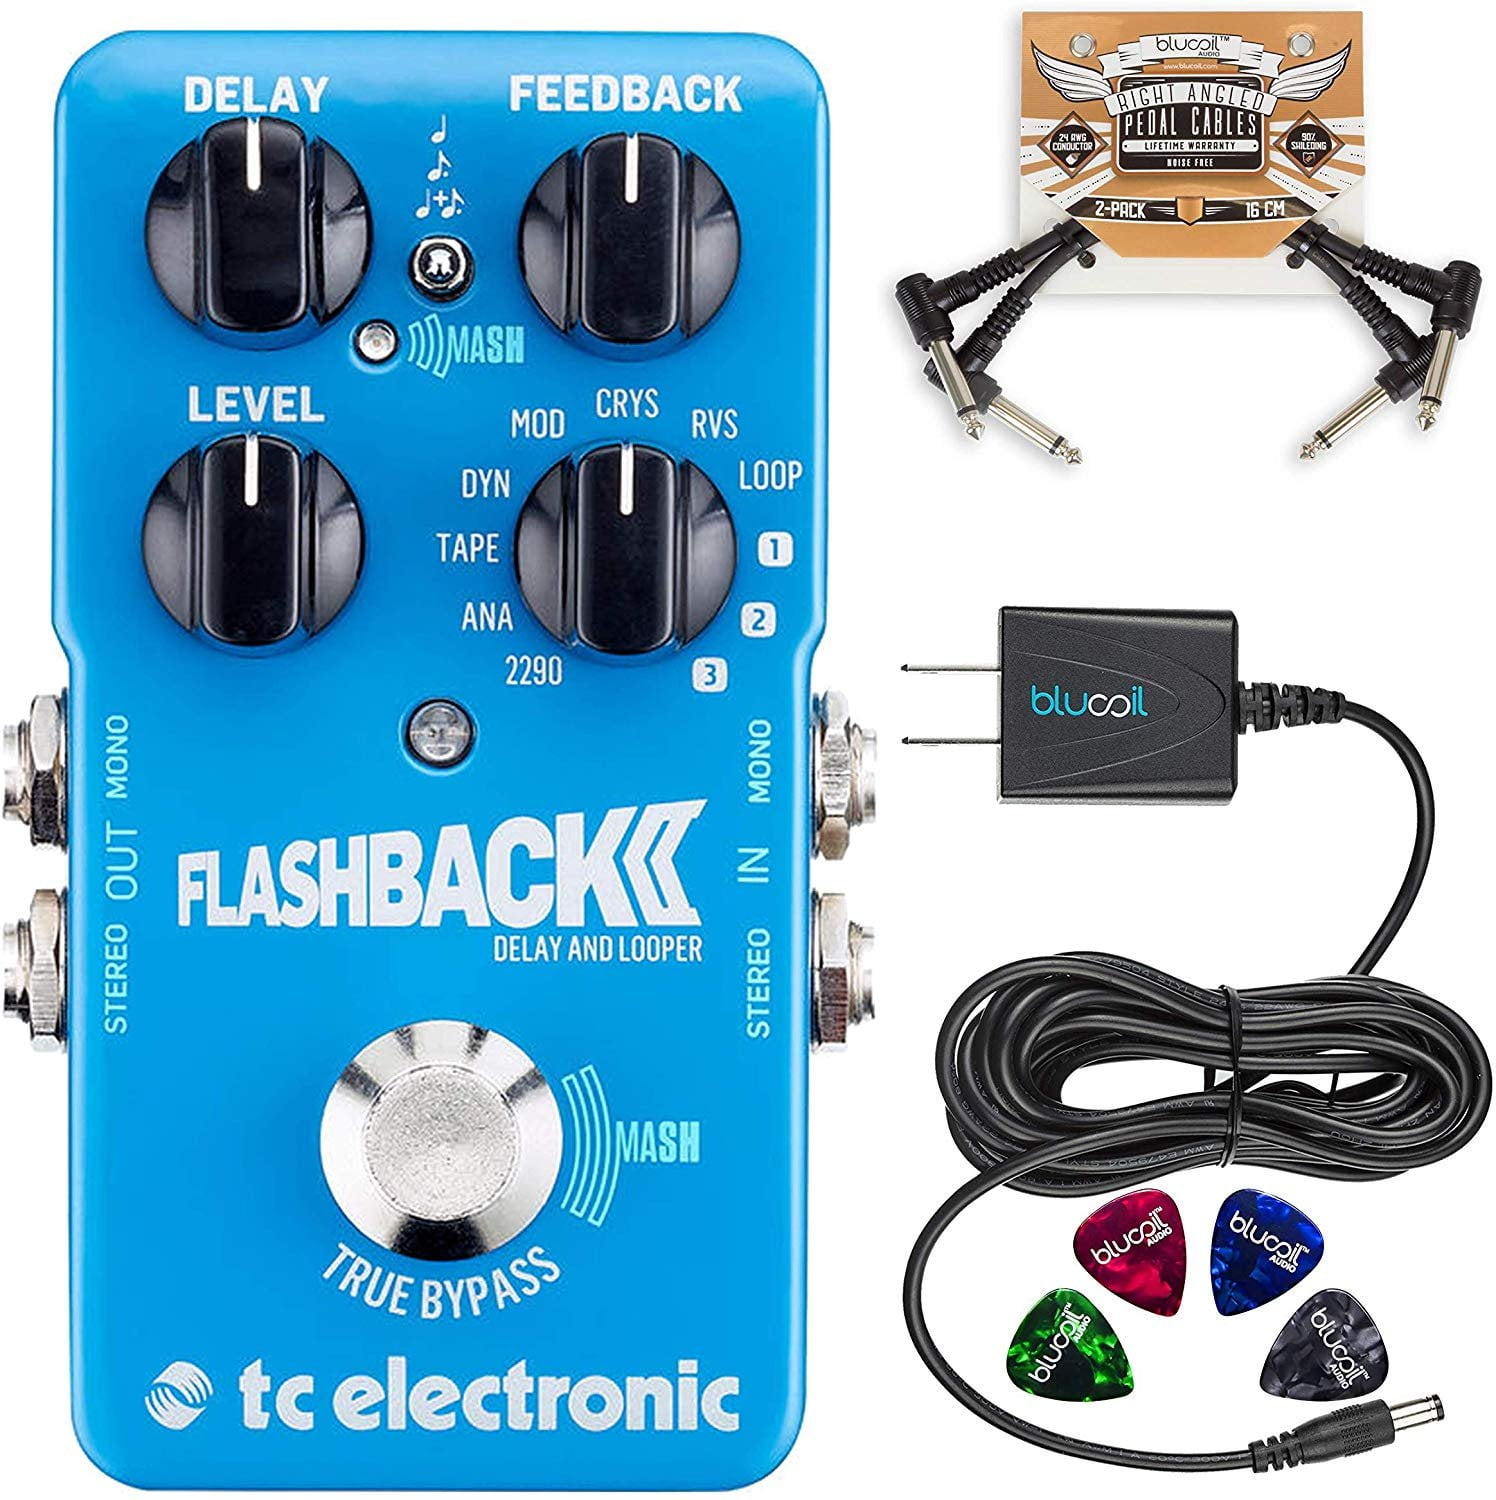 TC Electronic Flashback 2 Delay Pedal with TonePrint Bundle with Blucoil  Power Supply Slim AC/DC Adapter for 9 Volt DC 670mA, 2-Pack of Pedal Patch 